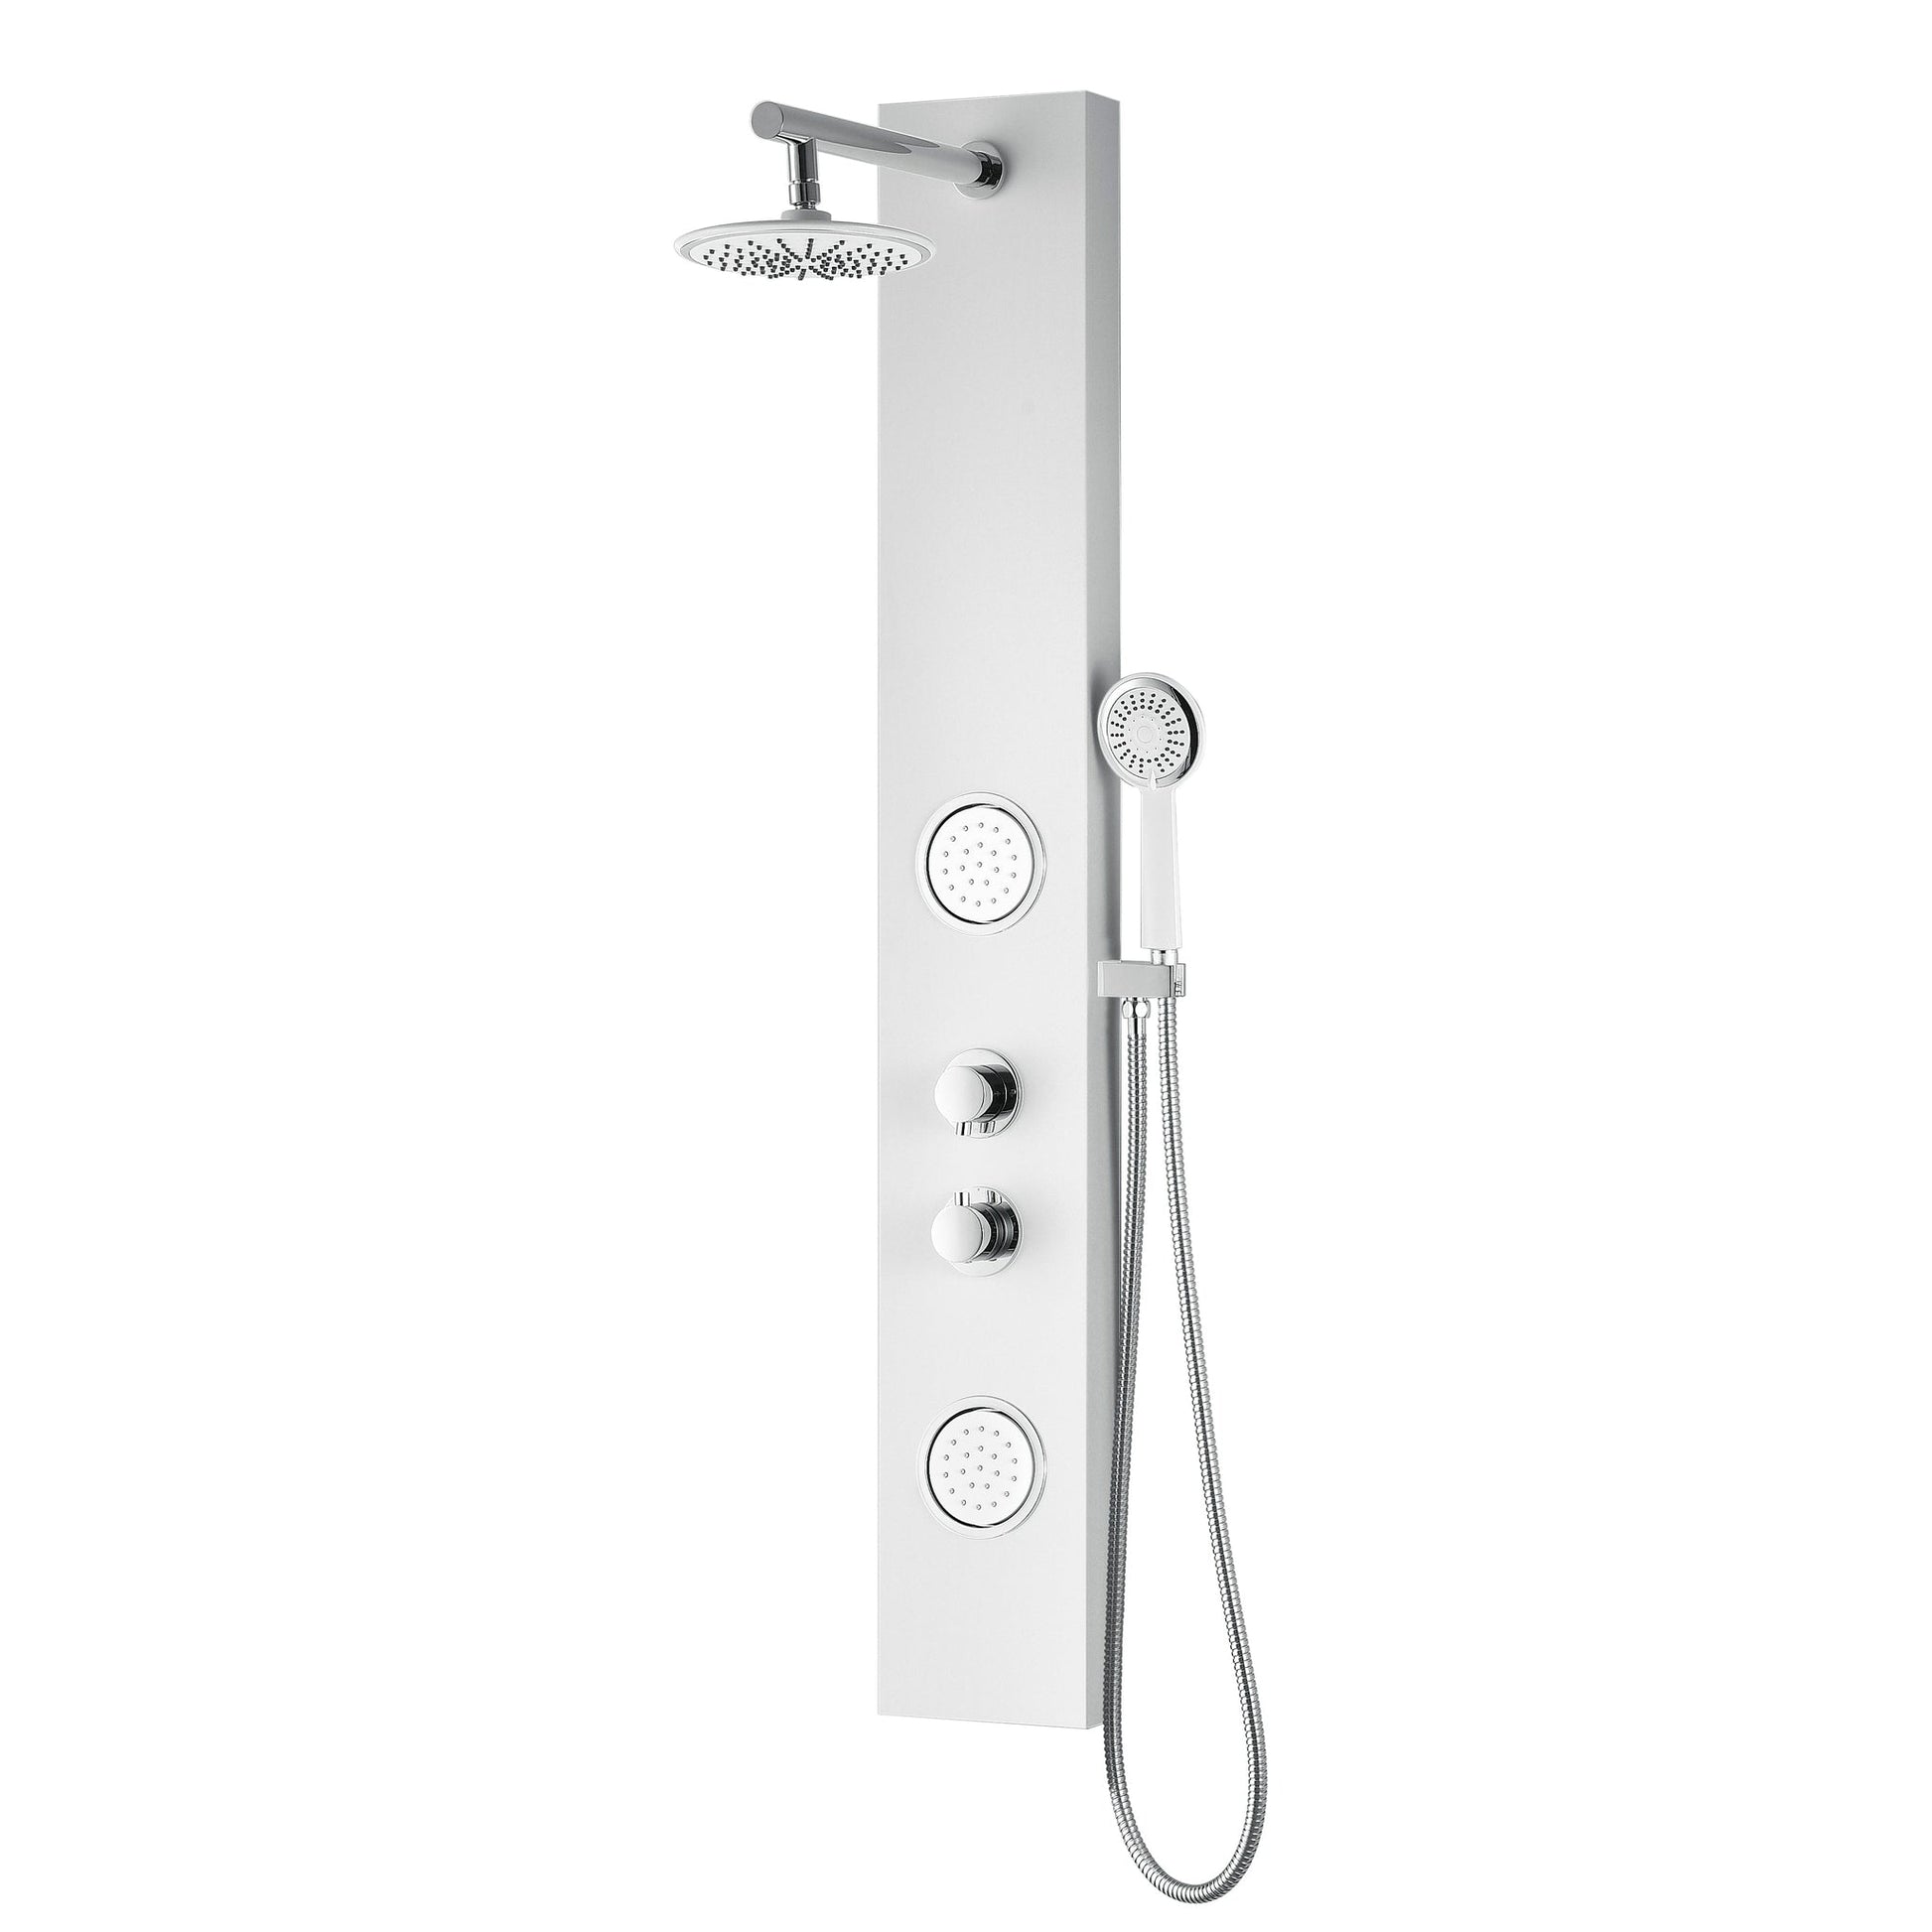 ANZZI Aquifer Series 56" White 2-Jetted Full Body Shower Panel With Heavy Rain Shower Head and Euro-Grip Hand Sprayer